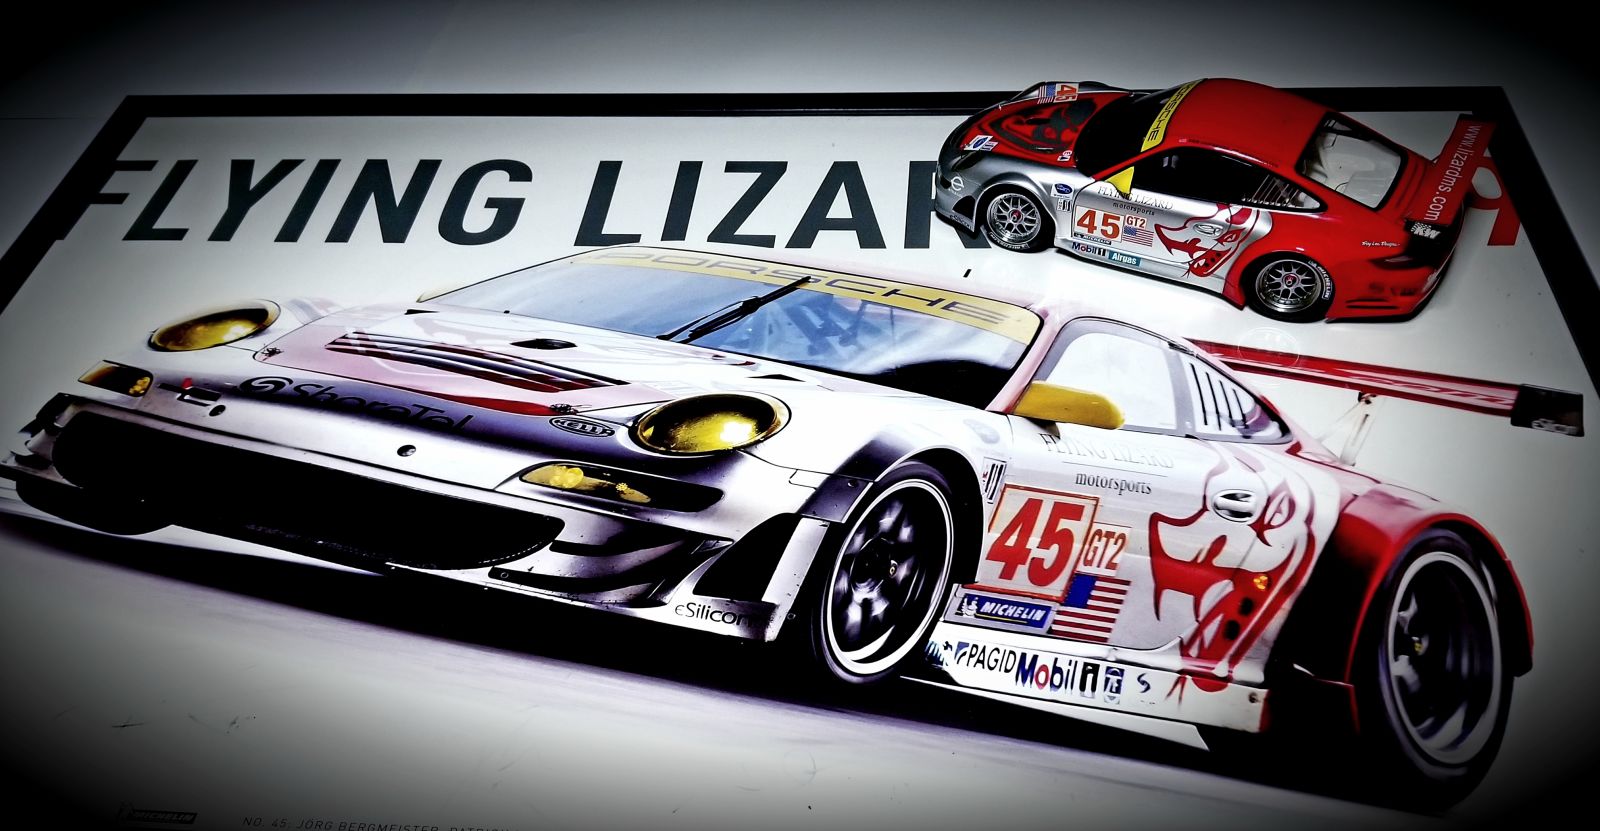 Illustration for article titled Rennsport Reunion: Who let the lizard out?